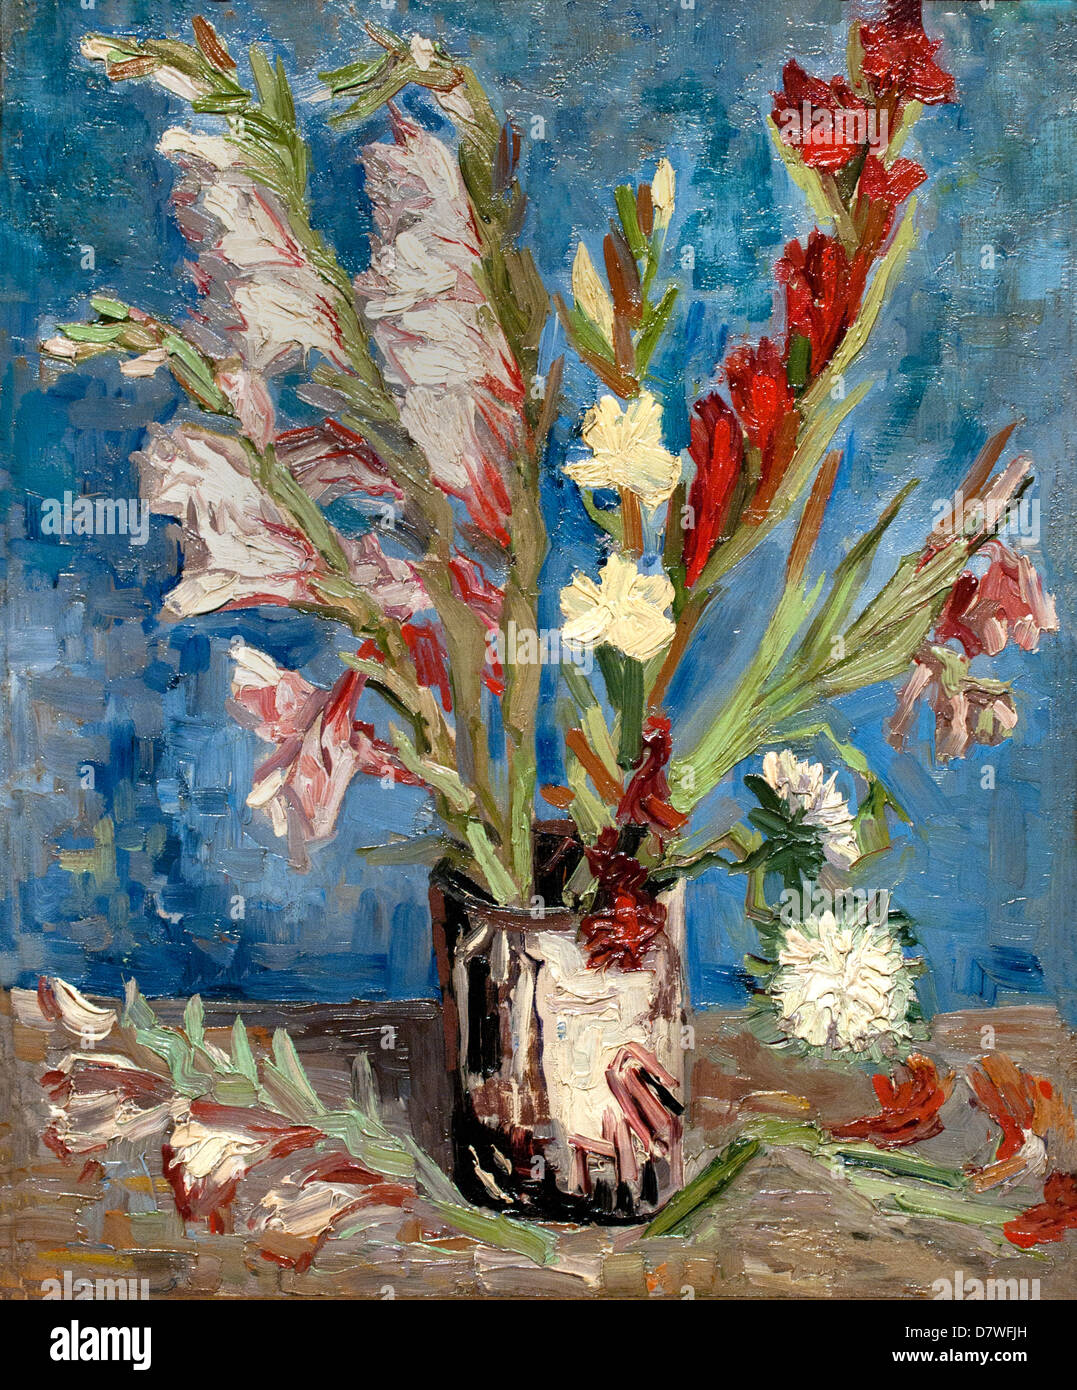 Vase with gladioli and China asters 1886 Vincent van Gogh 1853 - 1890  Dutch Netherlands Post Impressionism Stock Photo